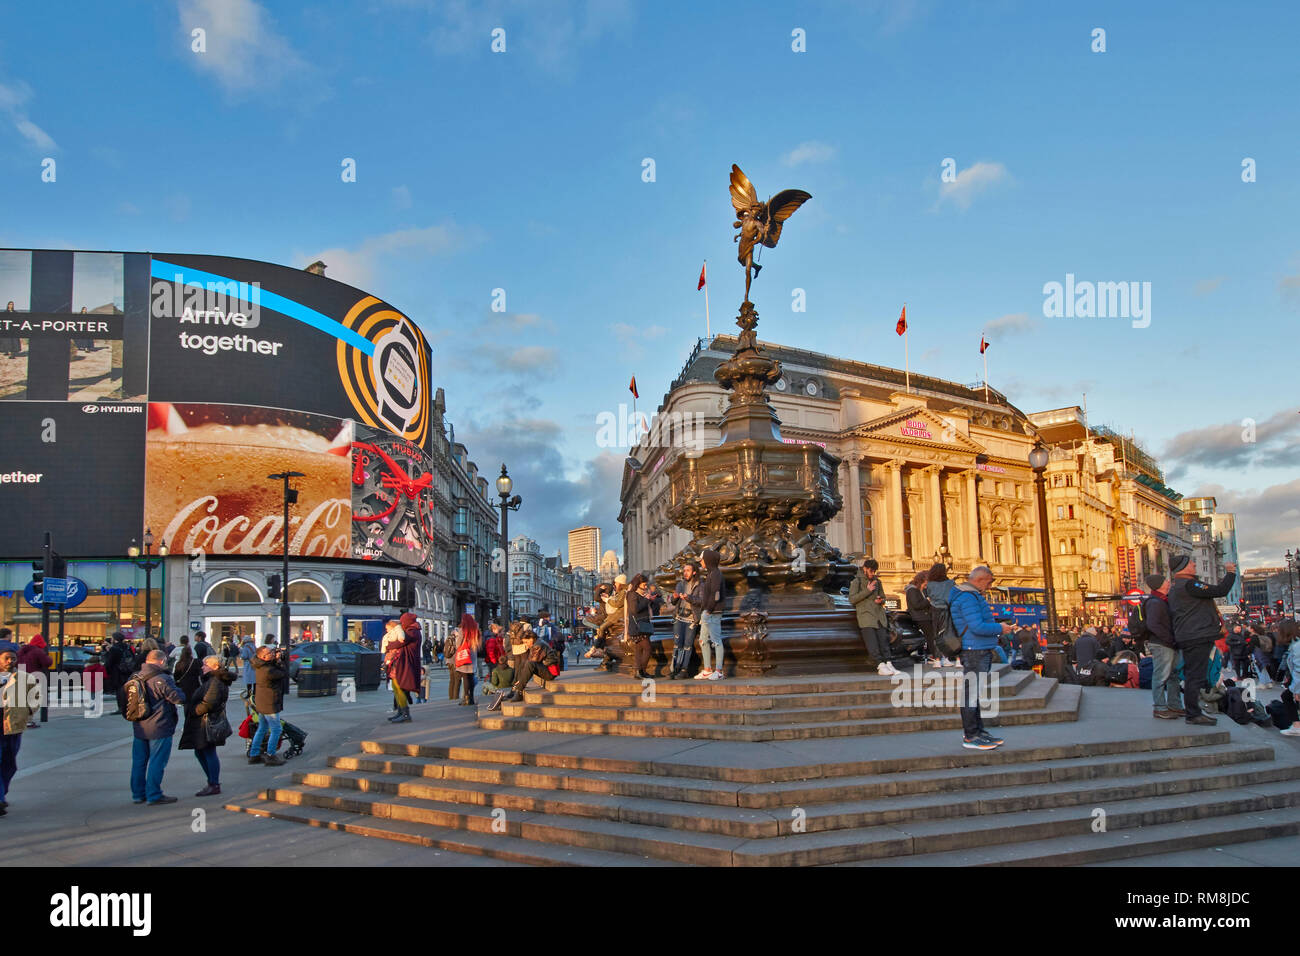 LONDON PICCADILLY CIRCUS THE STATUE OF EROS AND ADVERTISEMENTS Stock Photo